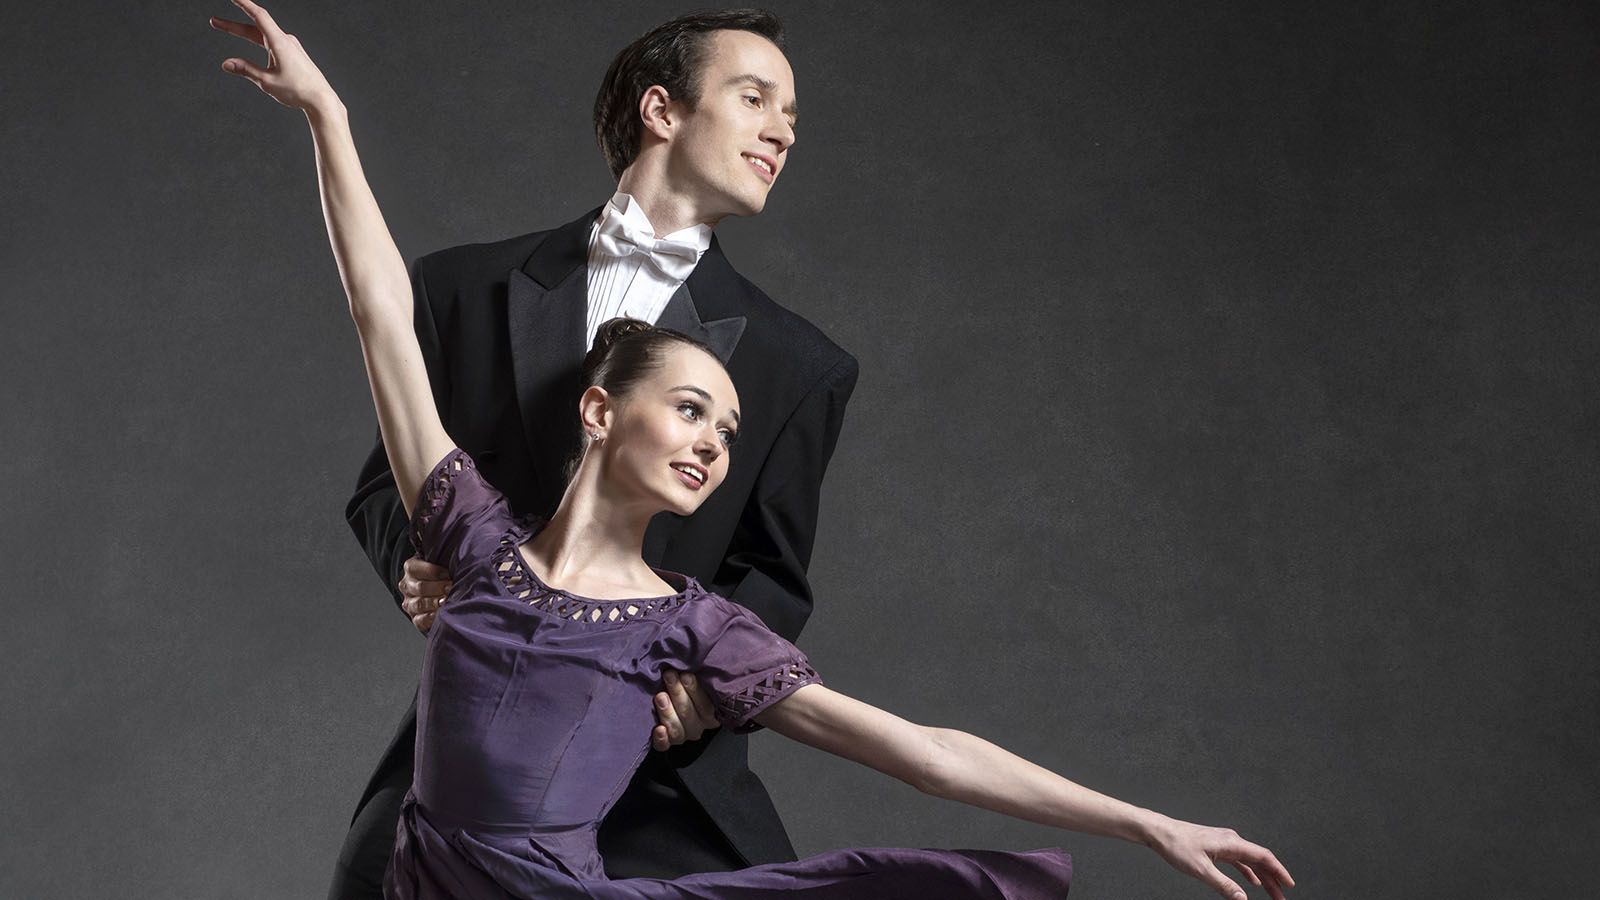 David Claypoole and Lindsay Navarre will appear in Fort Wayne Ballet’s Love Notes, which will be held Feb. 11-12 at the Freemasons Hall.